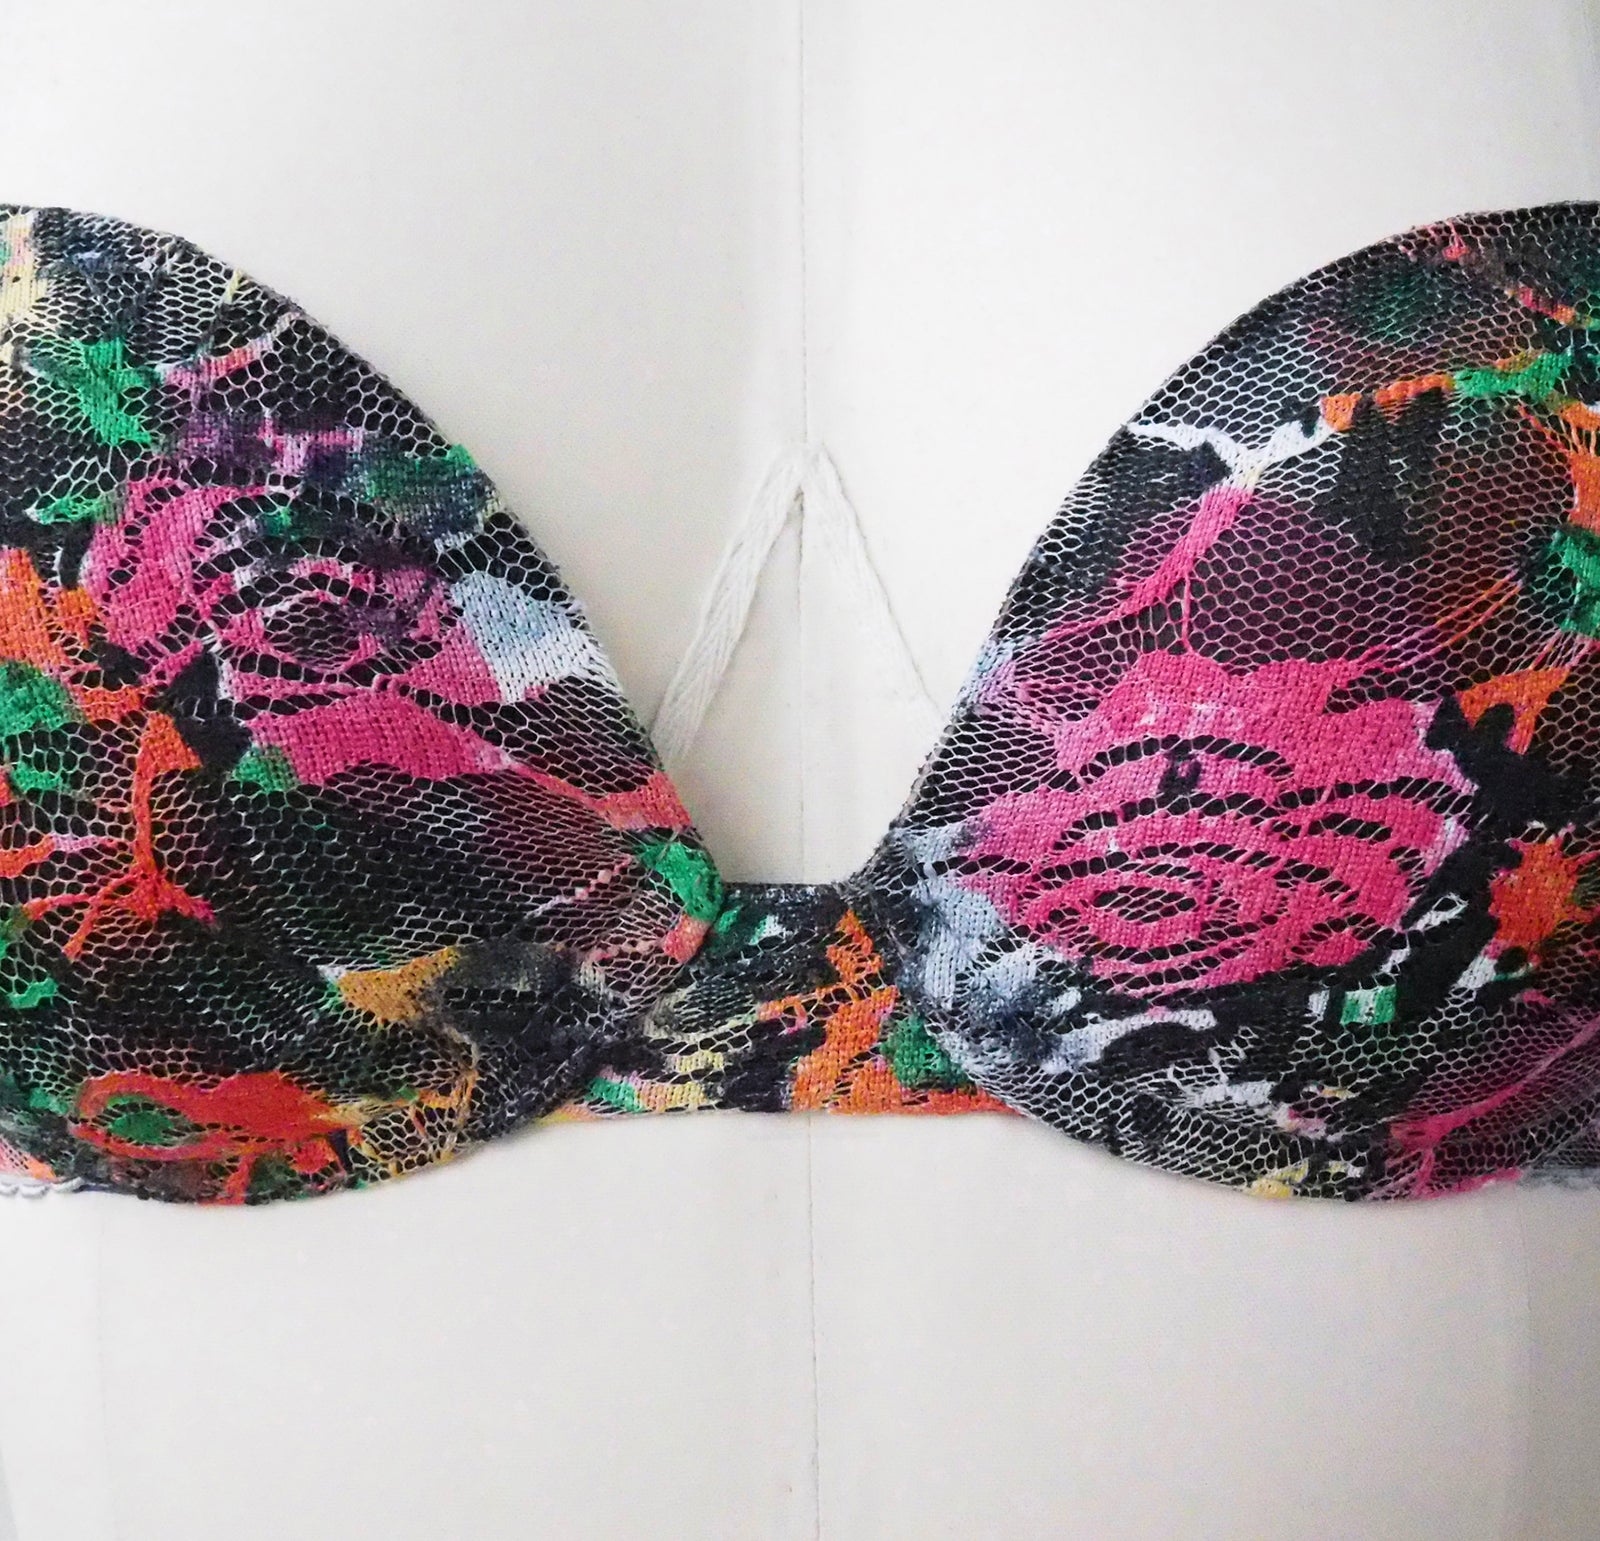 super soft foam bra with full netting and a printed design on it –